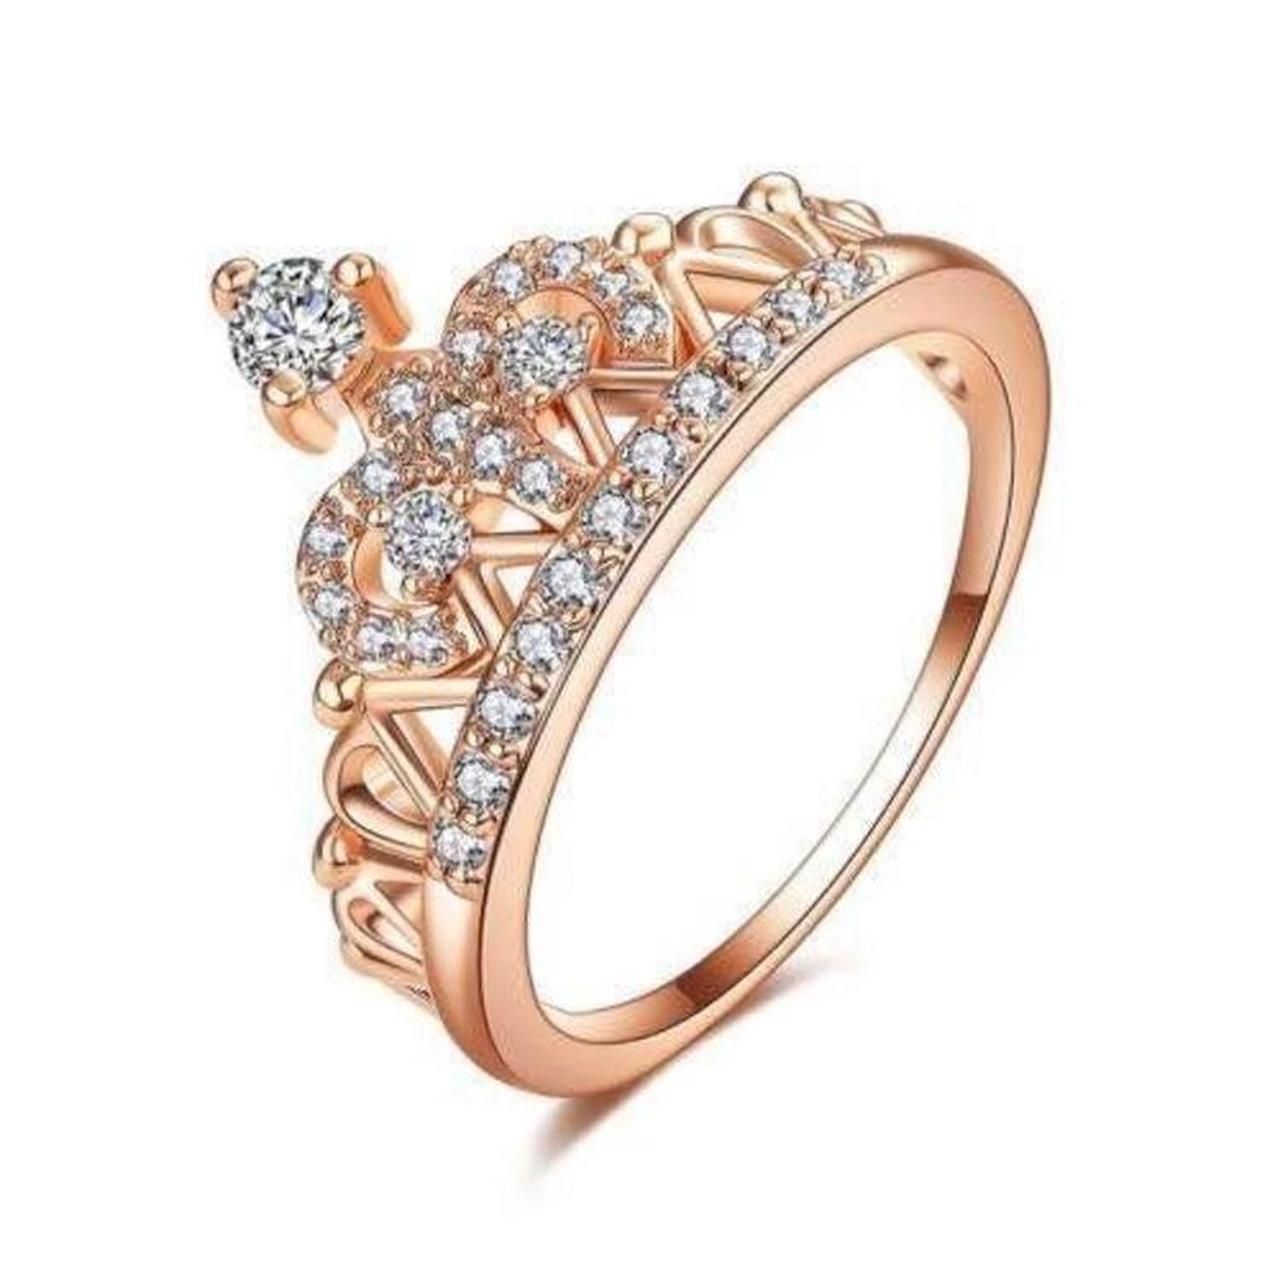 Product Image 4 - Rose gold princess crown ring
Condition: